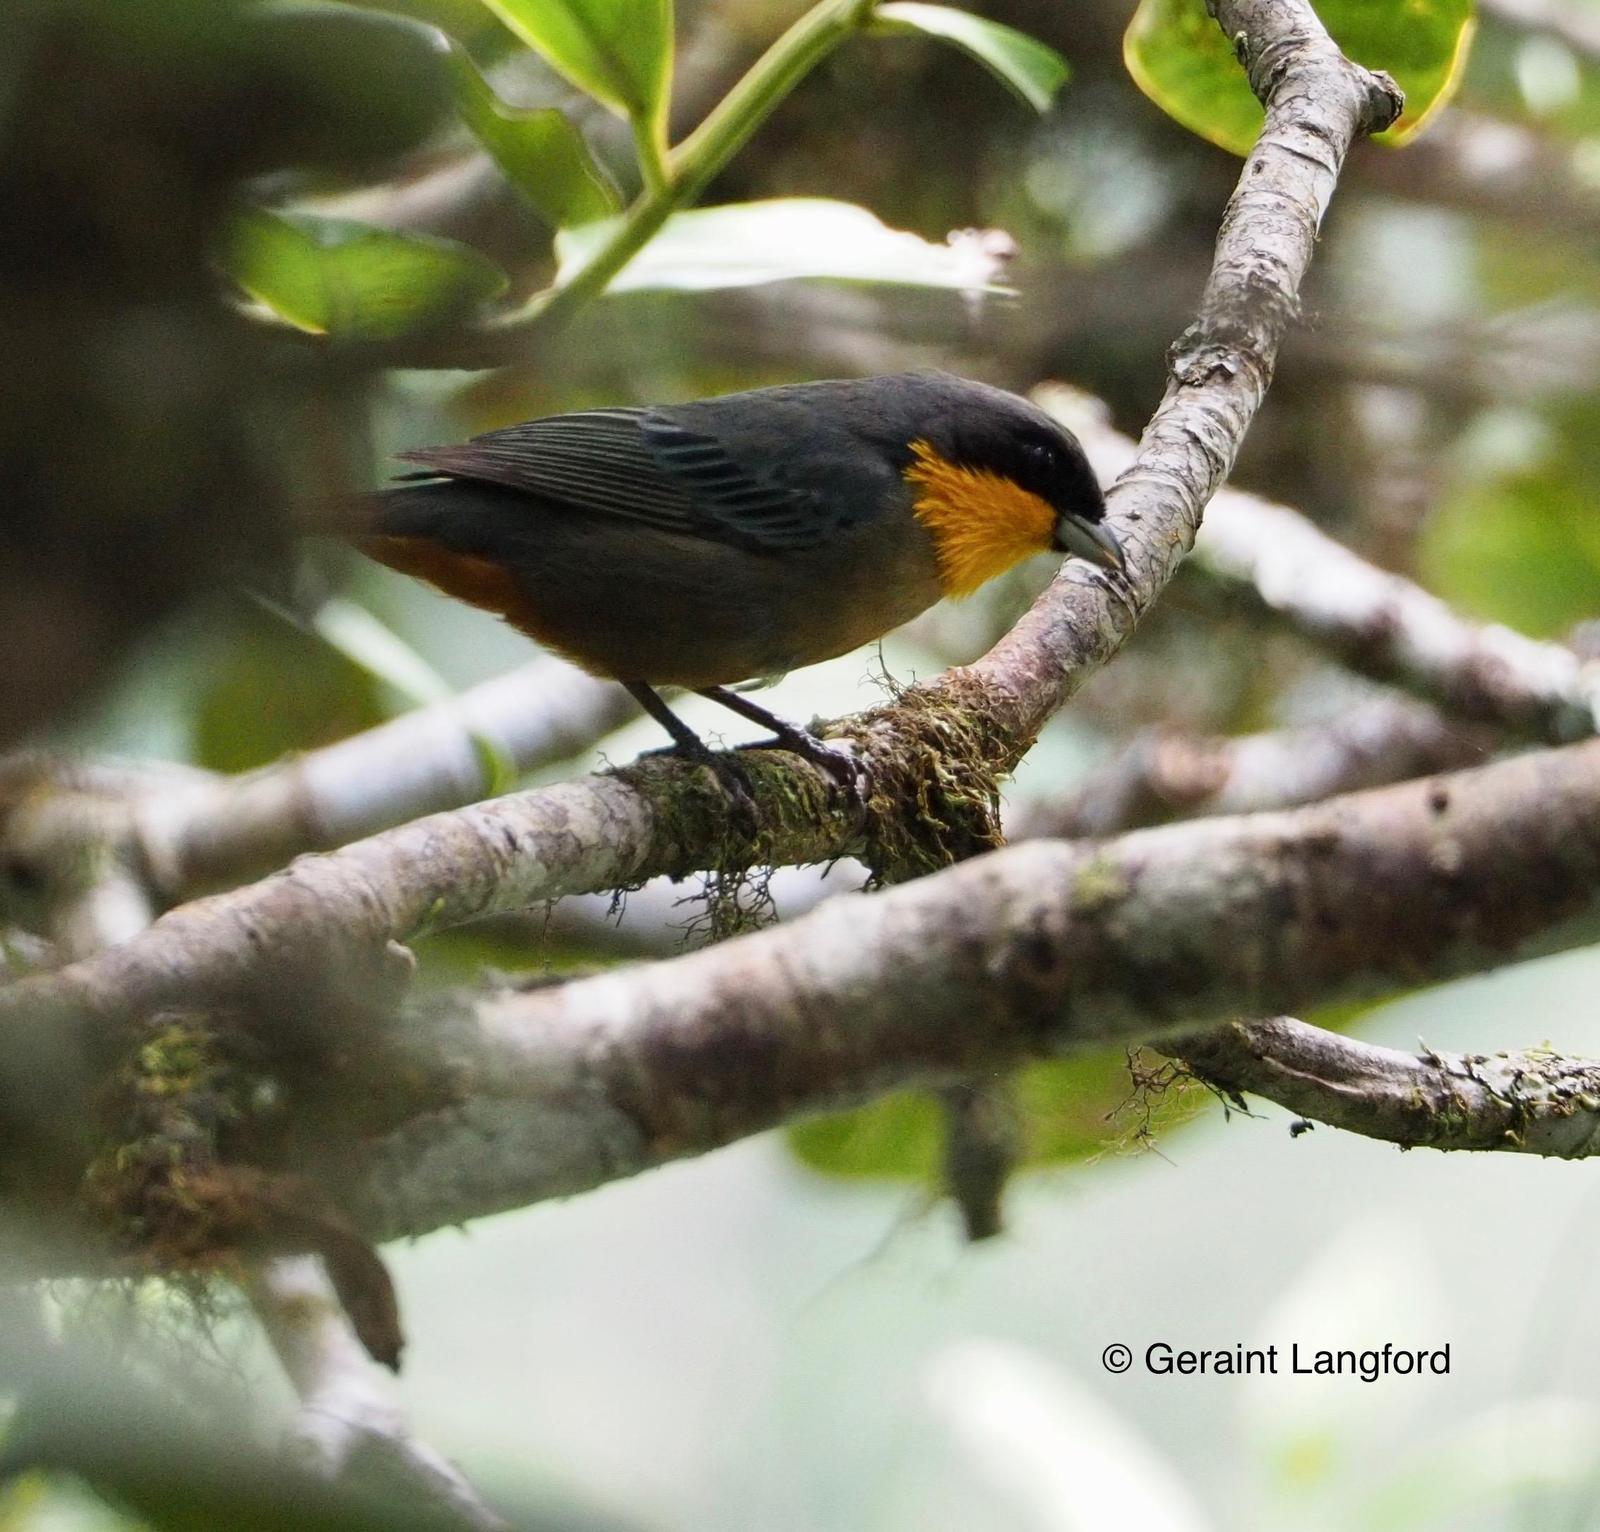 Yellow-throated Tanager Photo by Geraint Langford